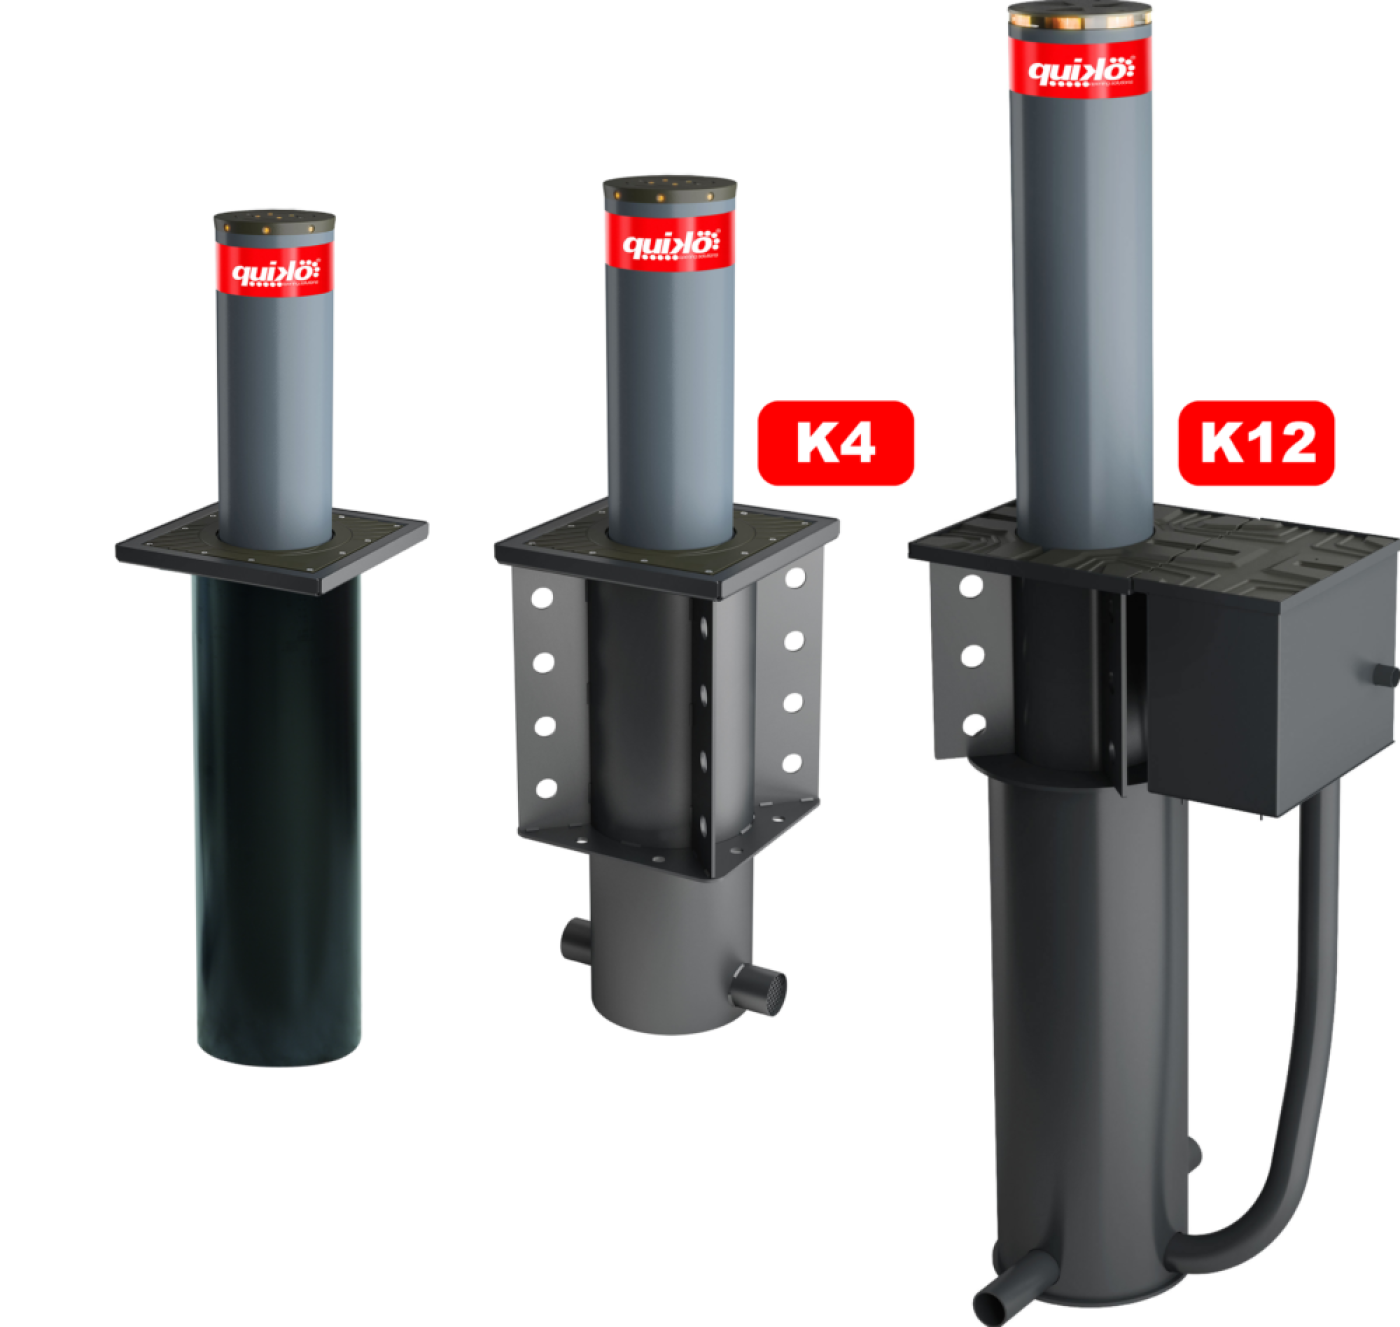 Auto rising bollards – a new concept in the safety industry